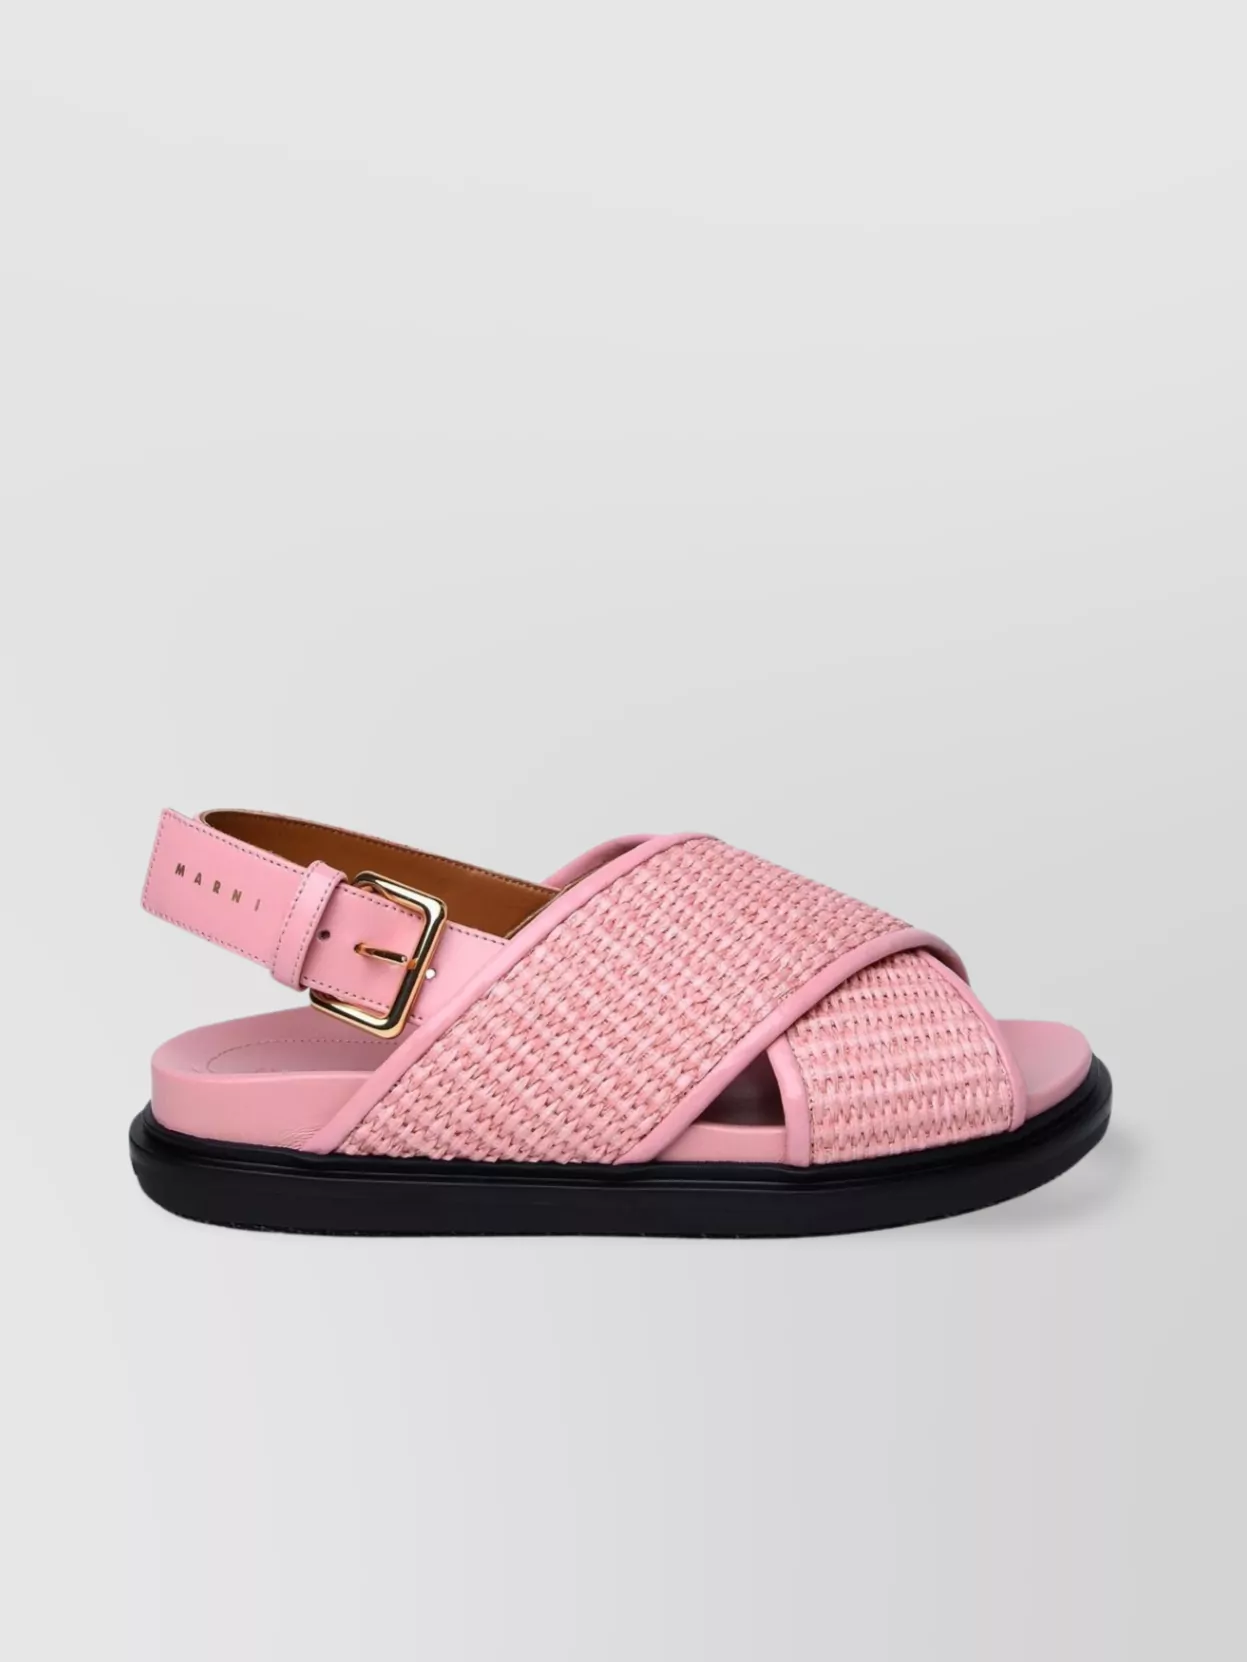 Marni Leather Blend Sandals Featuring Woven Texture In Pink